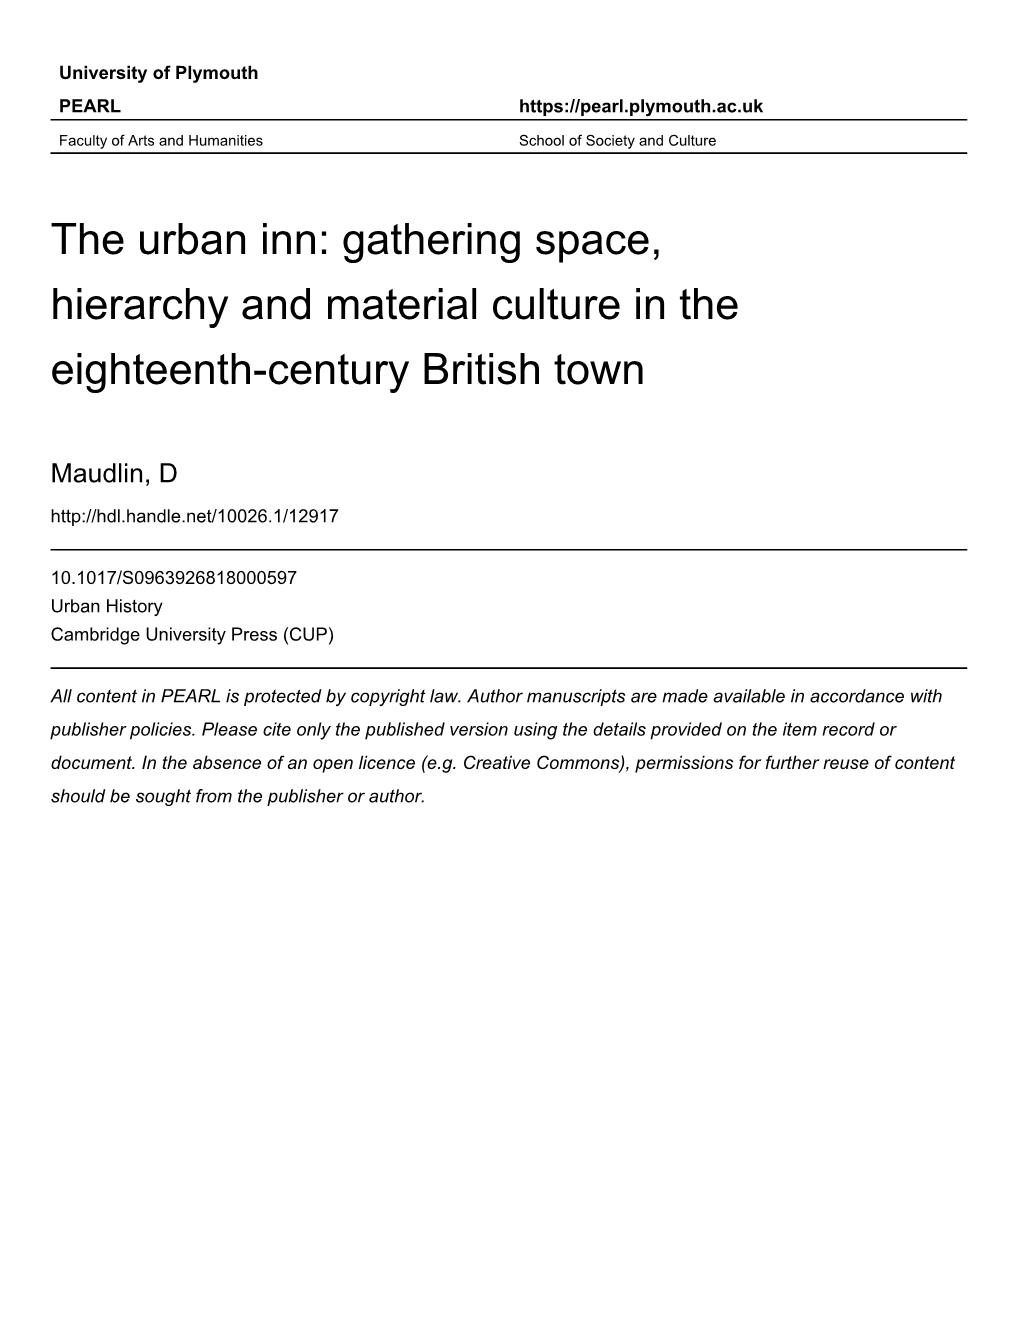 The Urban Inn: Gathering Space, Hierarchy and Material Culture in the Eighteenth-Century British Town